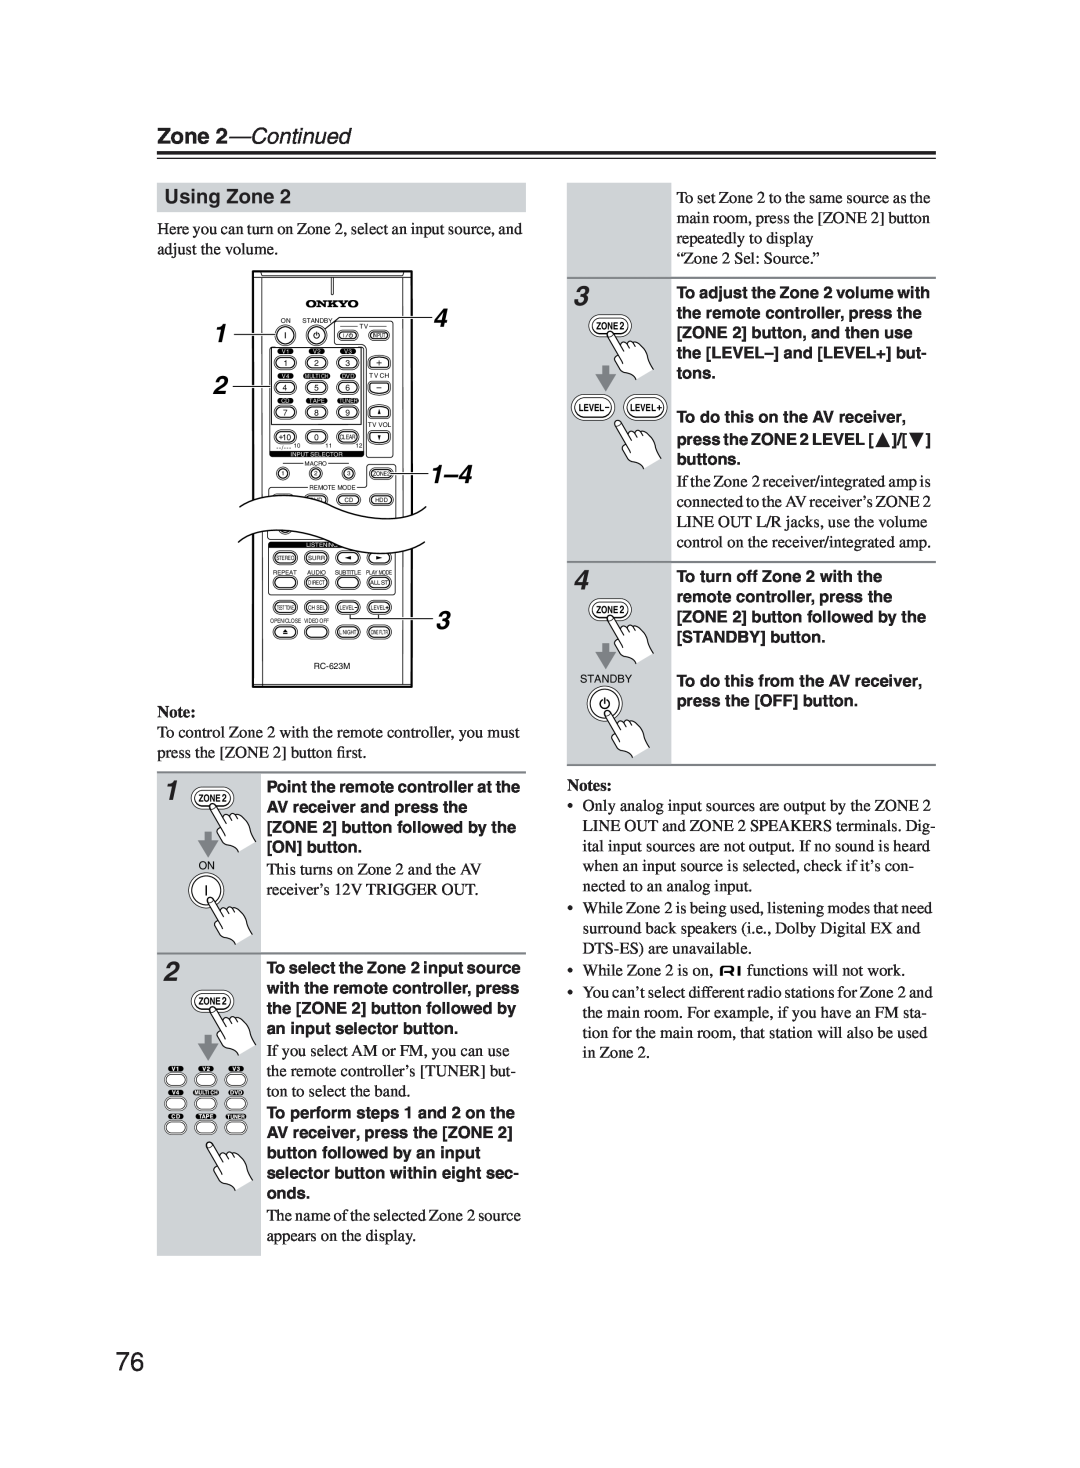 Onkyo TX-SR603X instruction manual Using Zone, Zone 2—Continued, Notes 